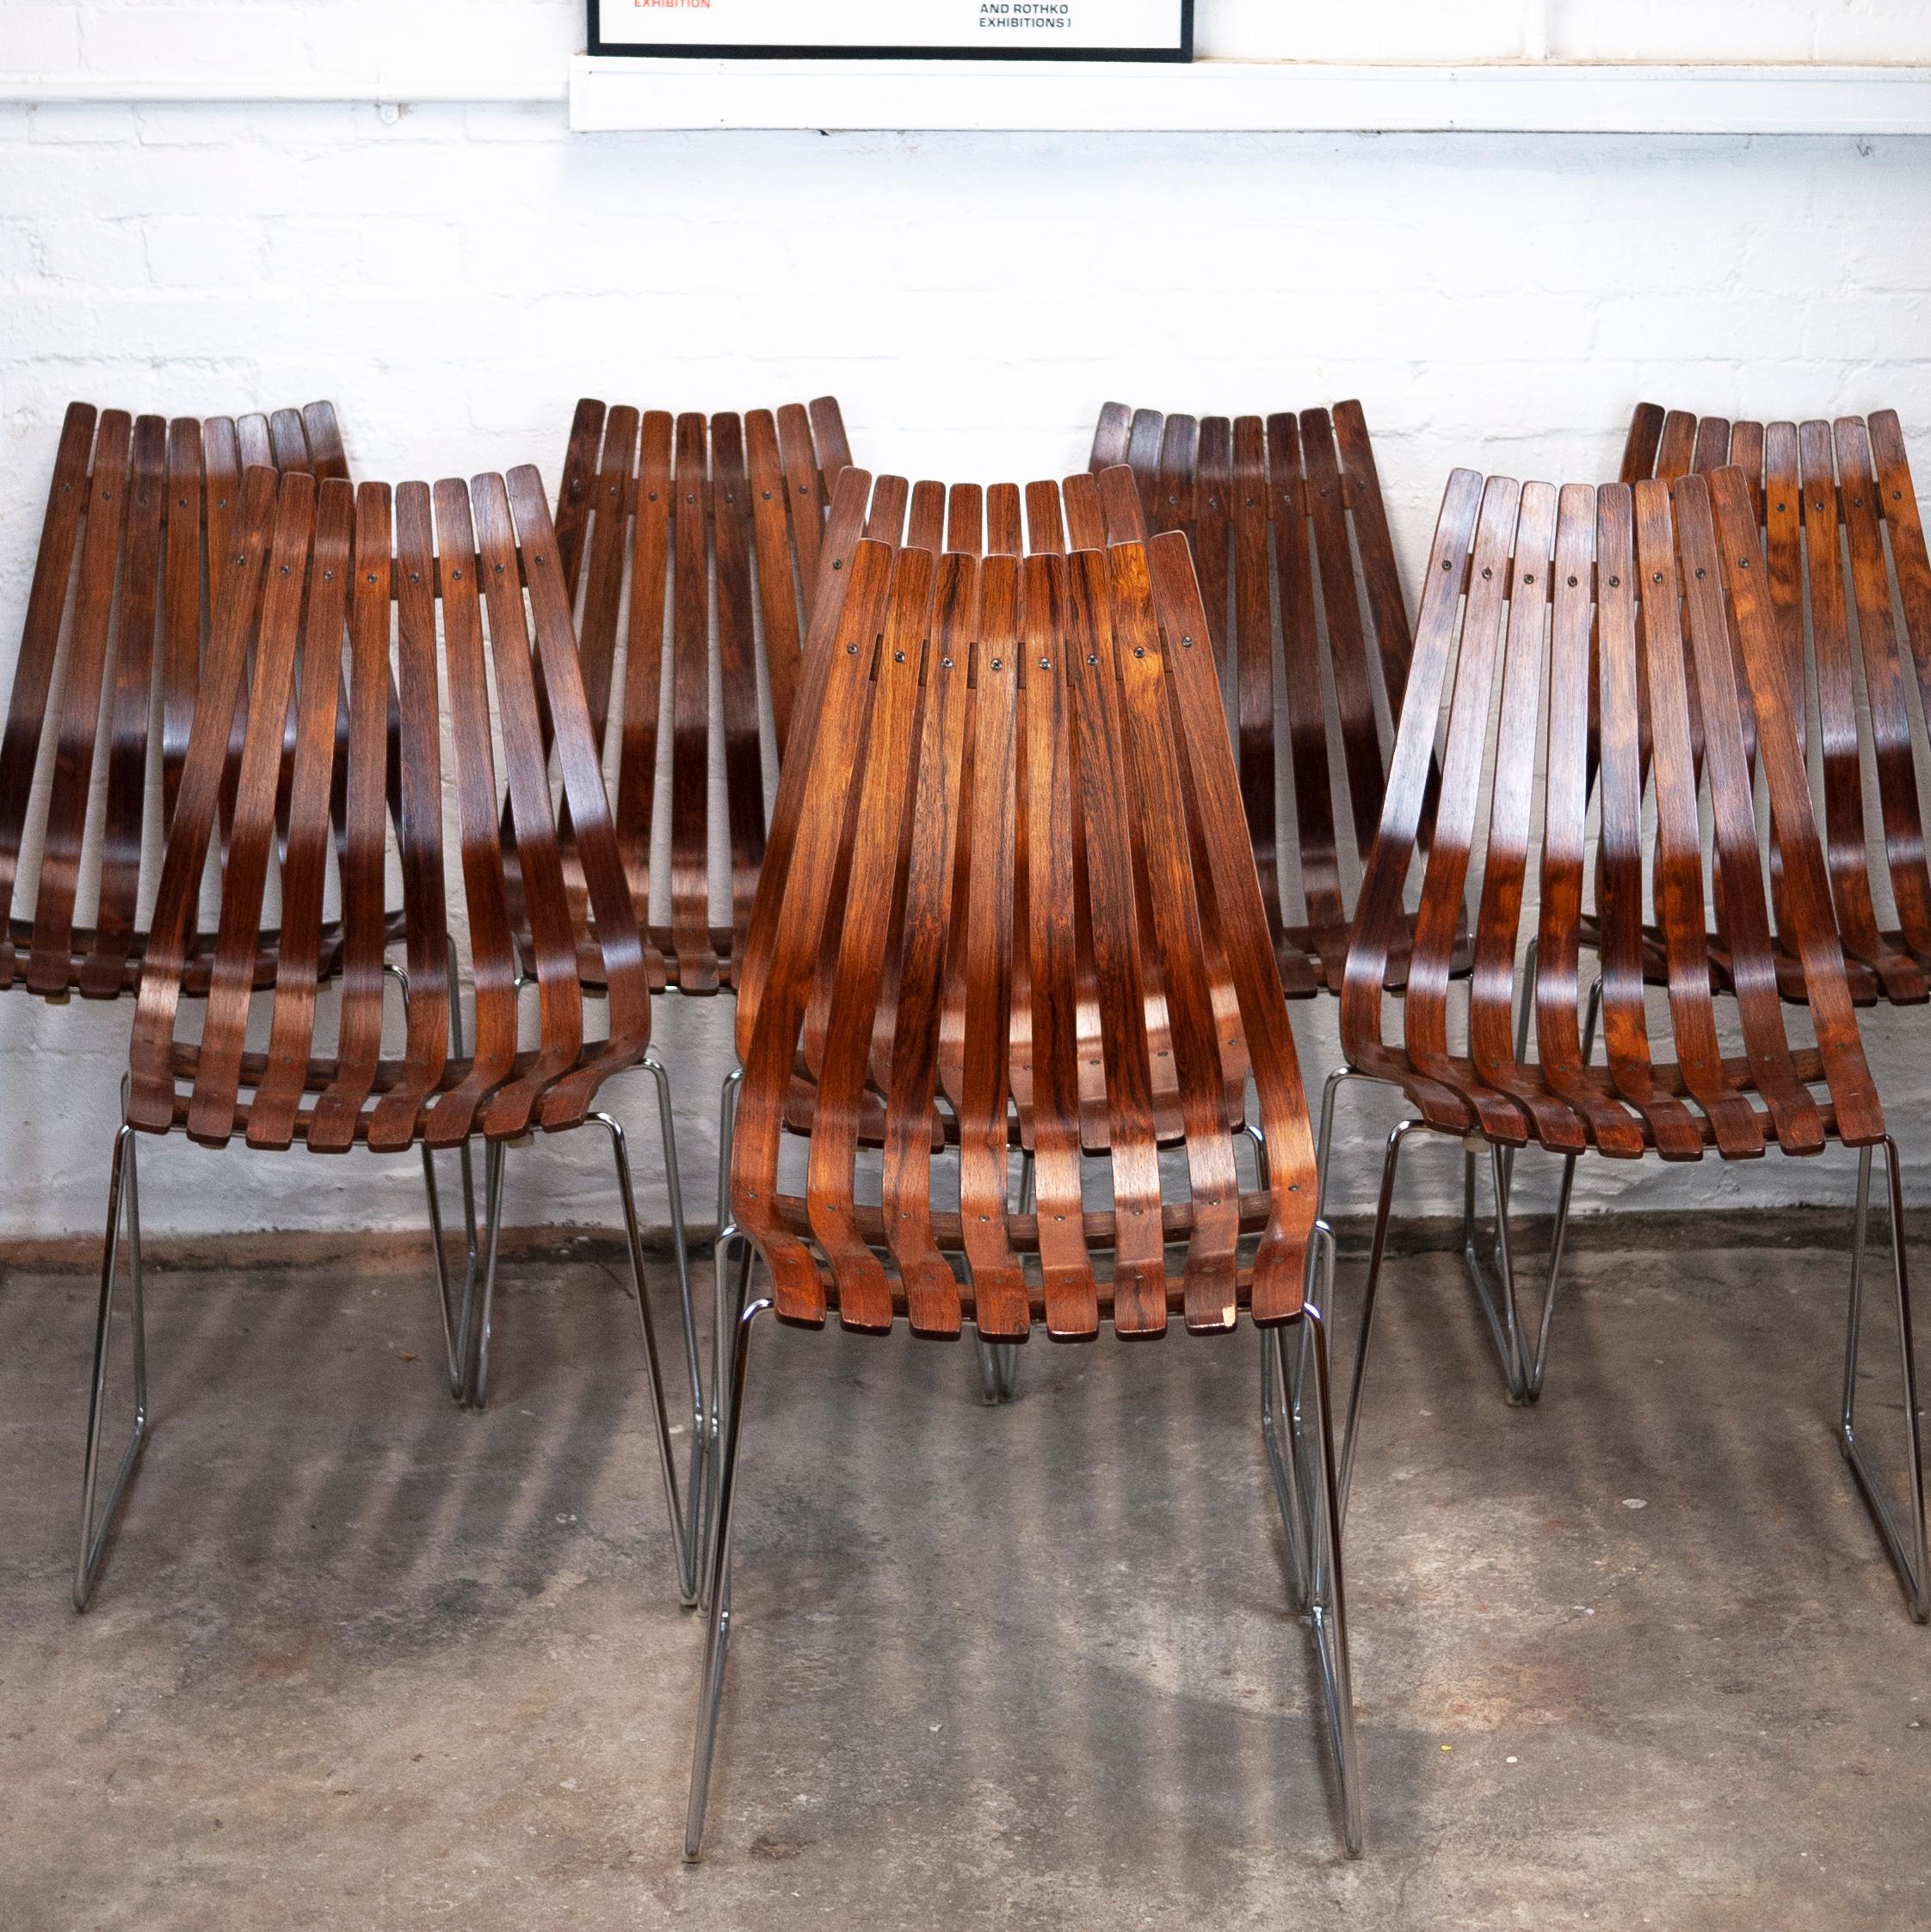 A set of 8 dining chairs designed by Hans Brattrud and manufactured by Hove Møbler.

Manufacturer - Hove Møbler.

Designer - Hans Brattrud.

Design Period - 1960 to 1969

Style - Vintage, Mid-Century.

Detailed condition -